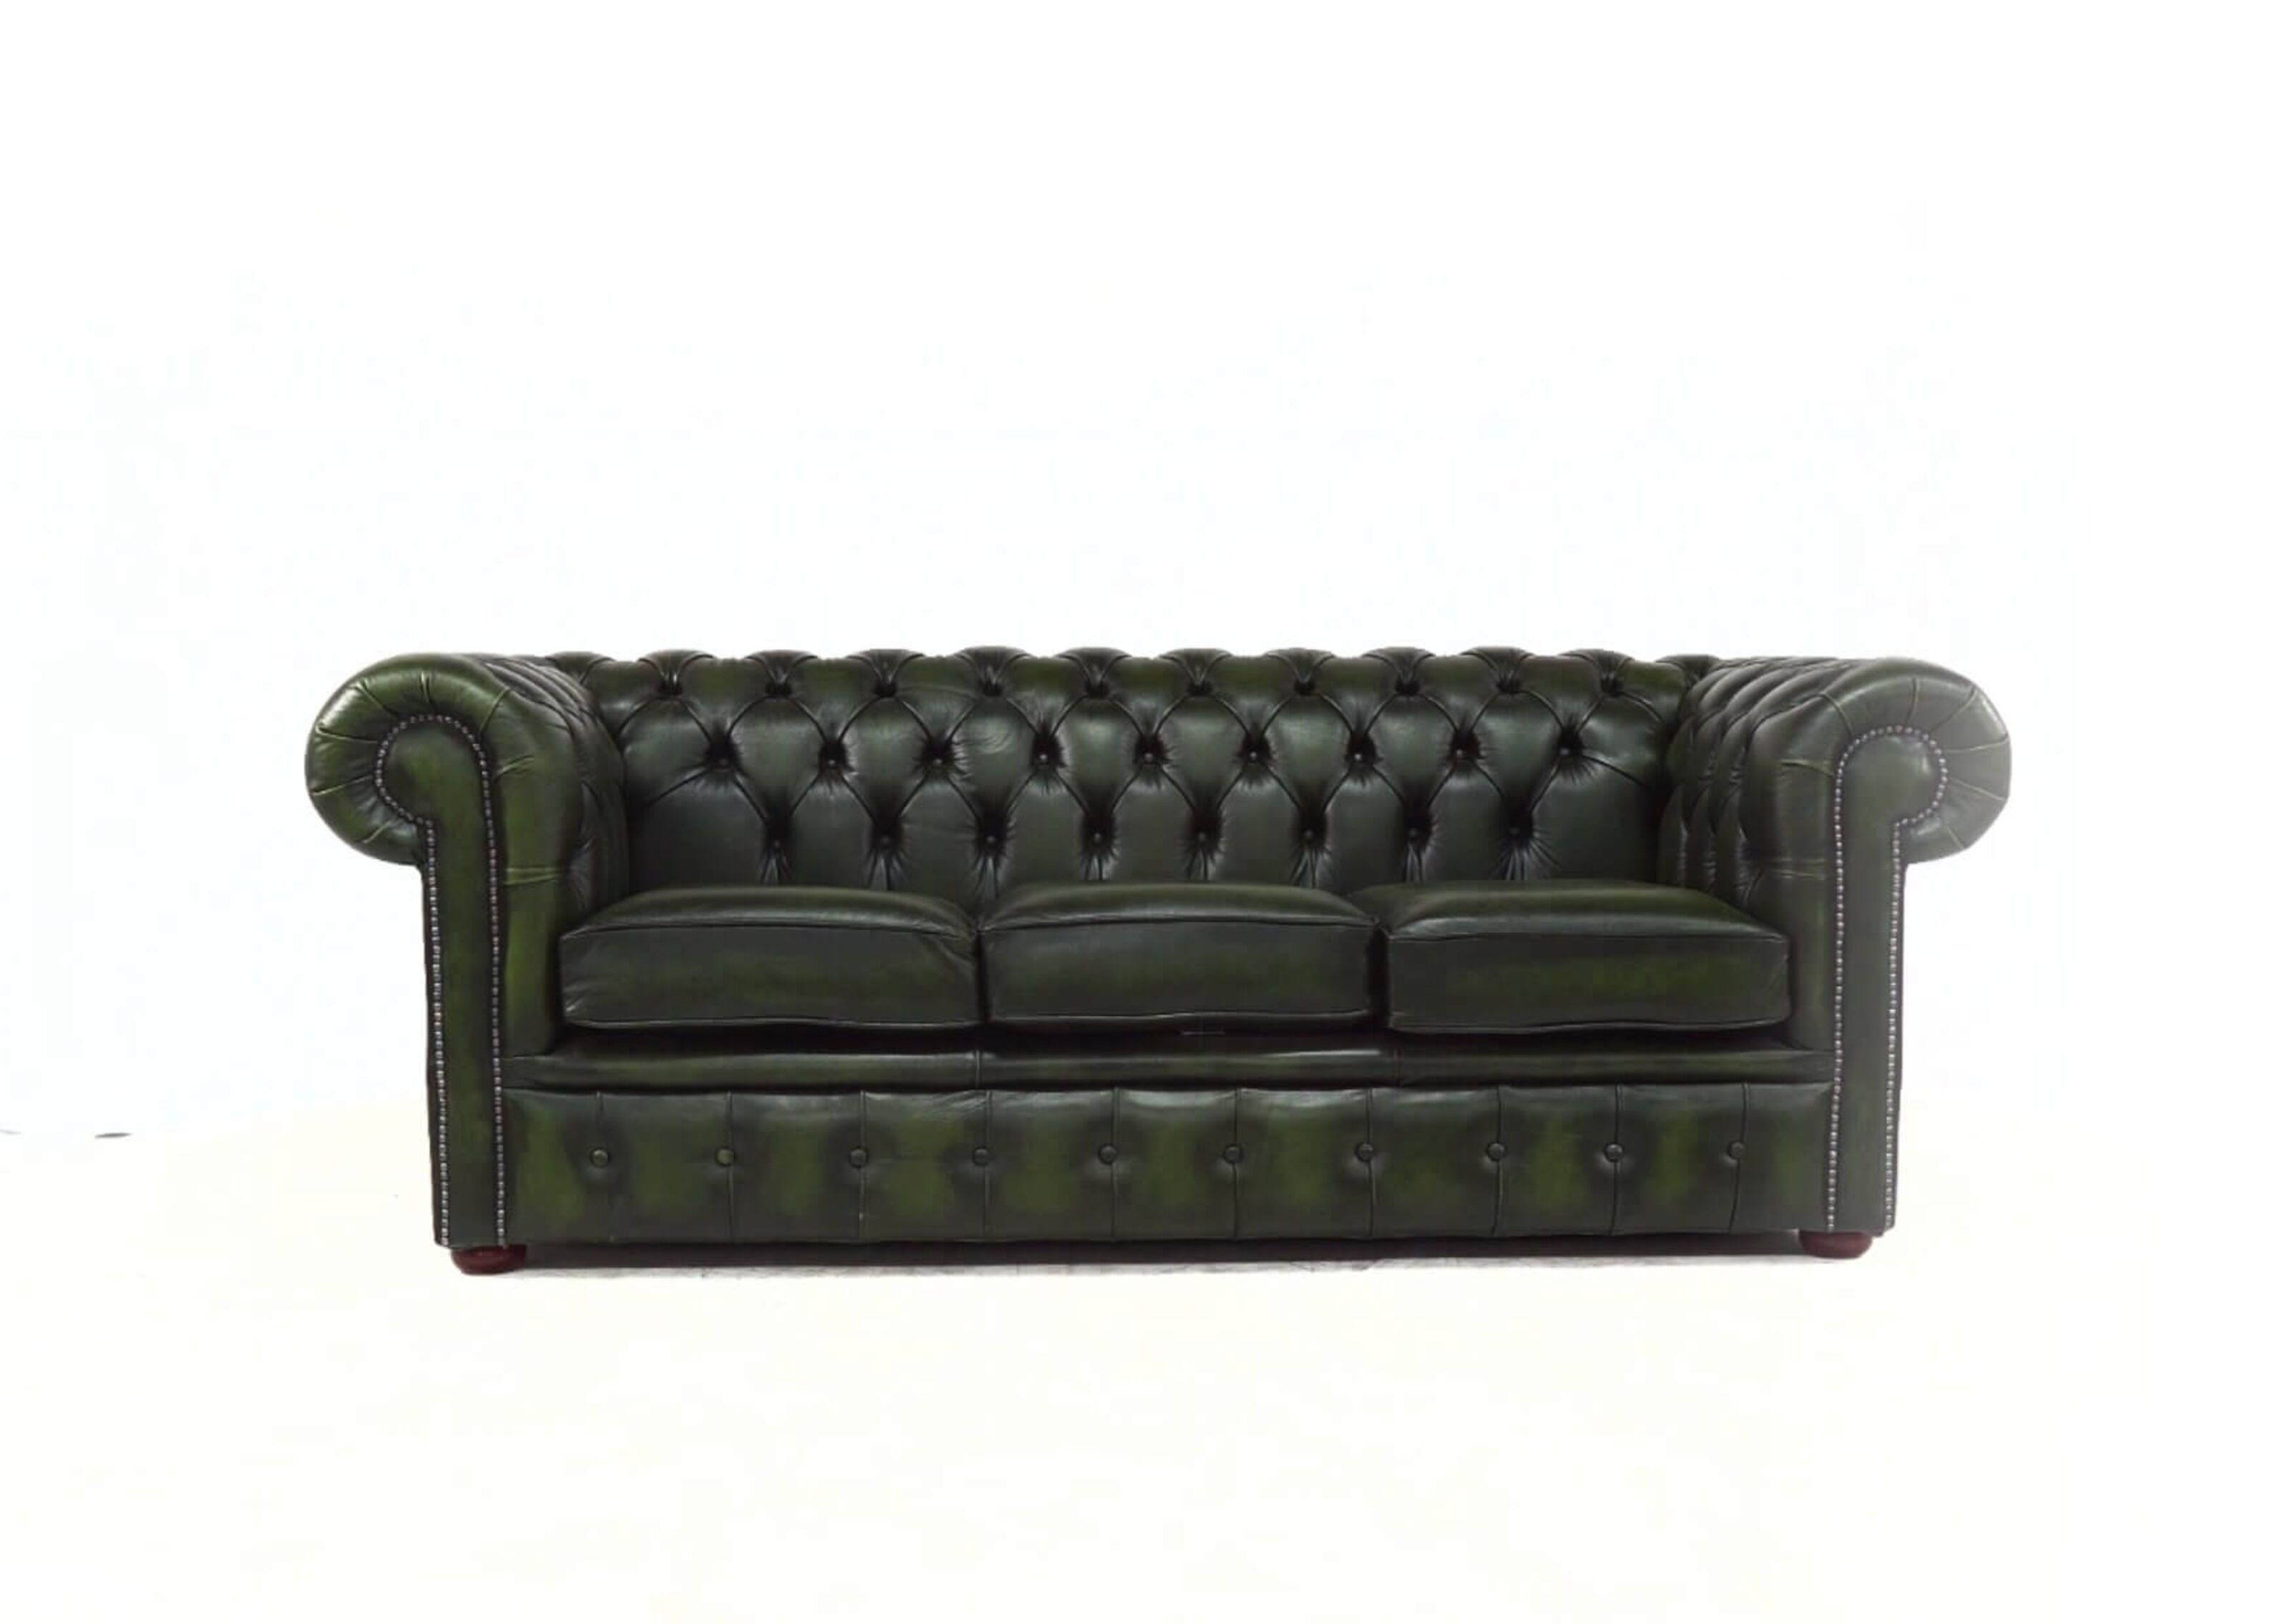 Deciding Between a Chesterfield and a Couch  %Post Title